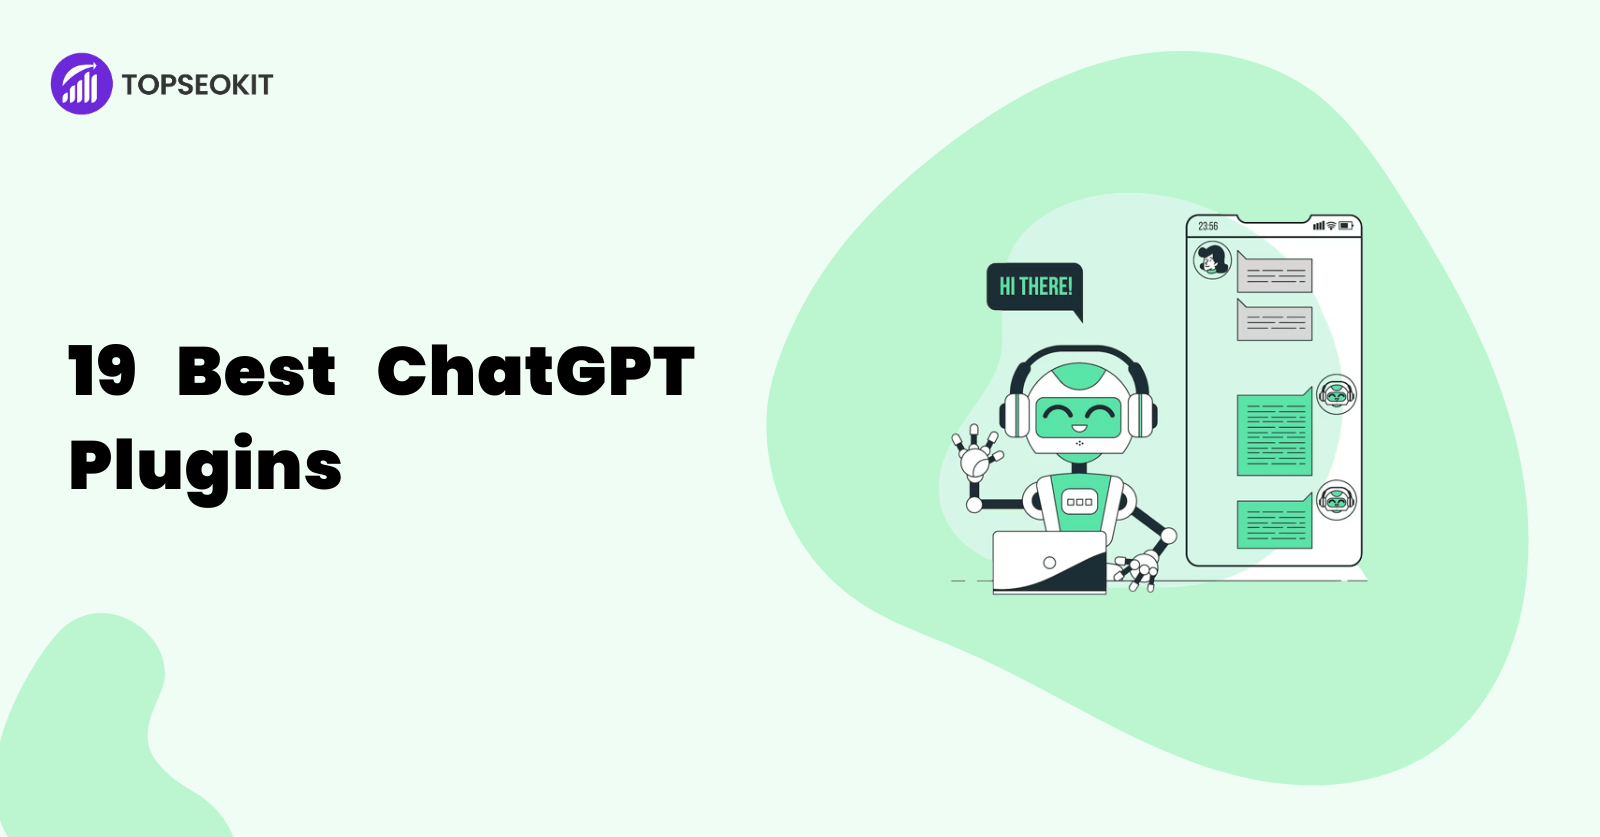 19 best ChatGPT plugins everyone should use